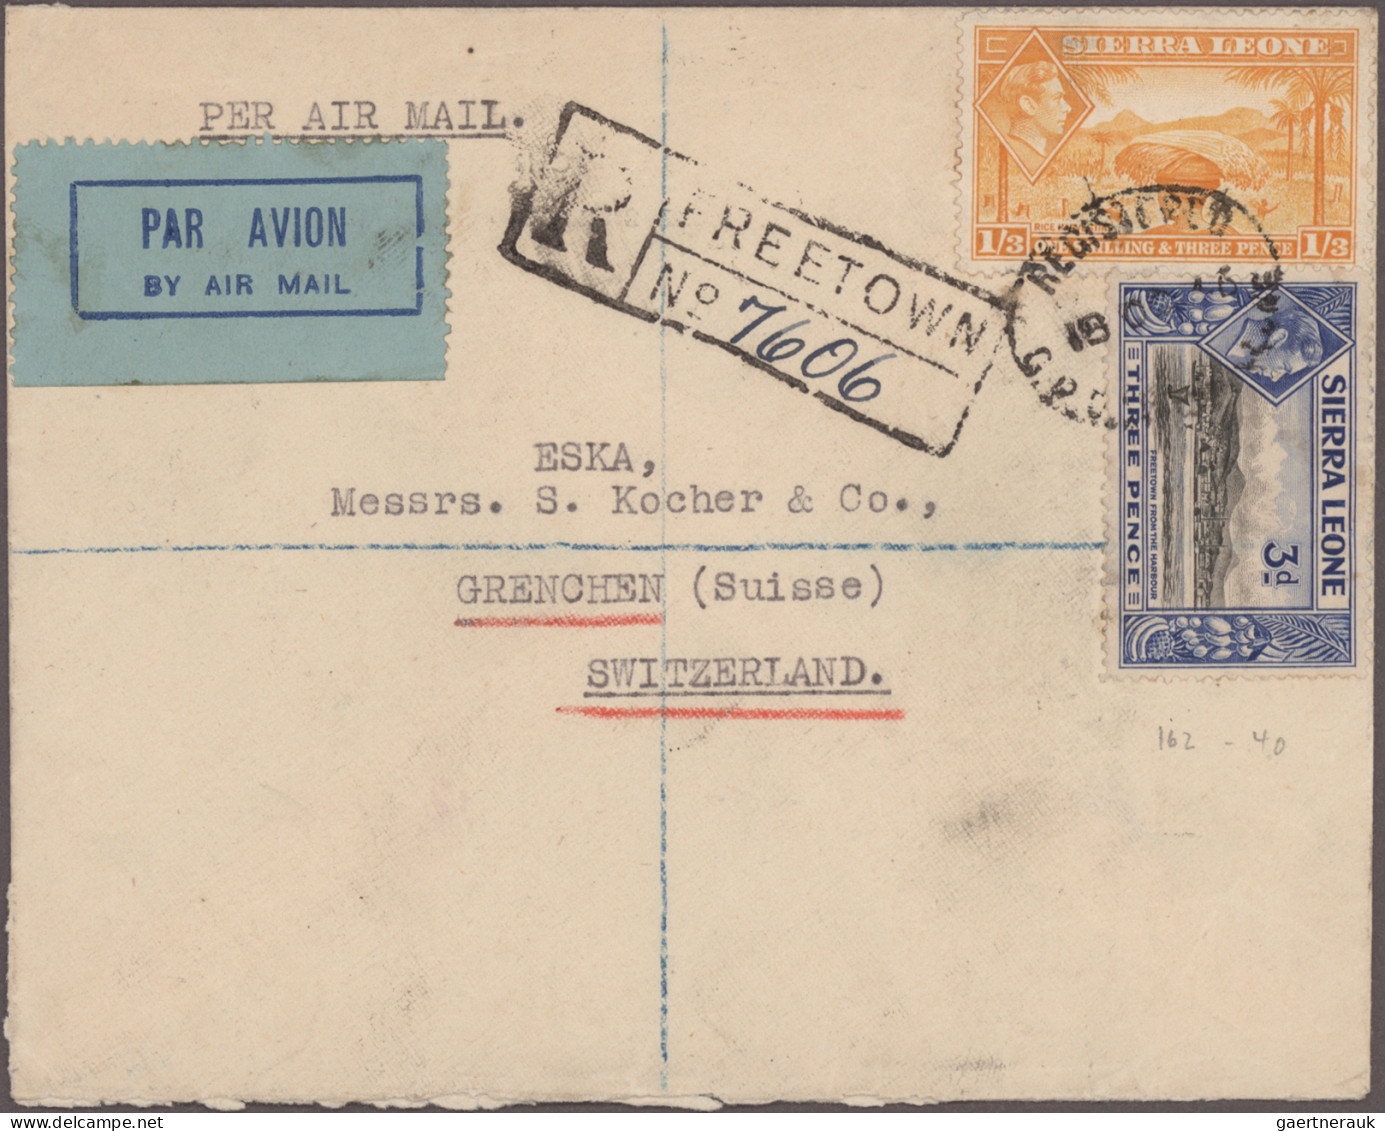 Africa: 1893/2002, balance of apprx. 190 covers/cards incl. a good percentage of